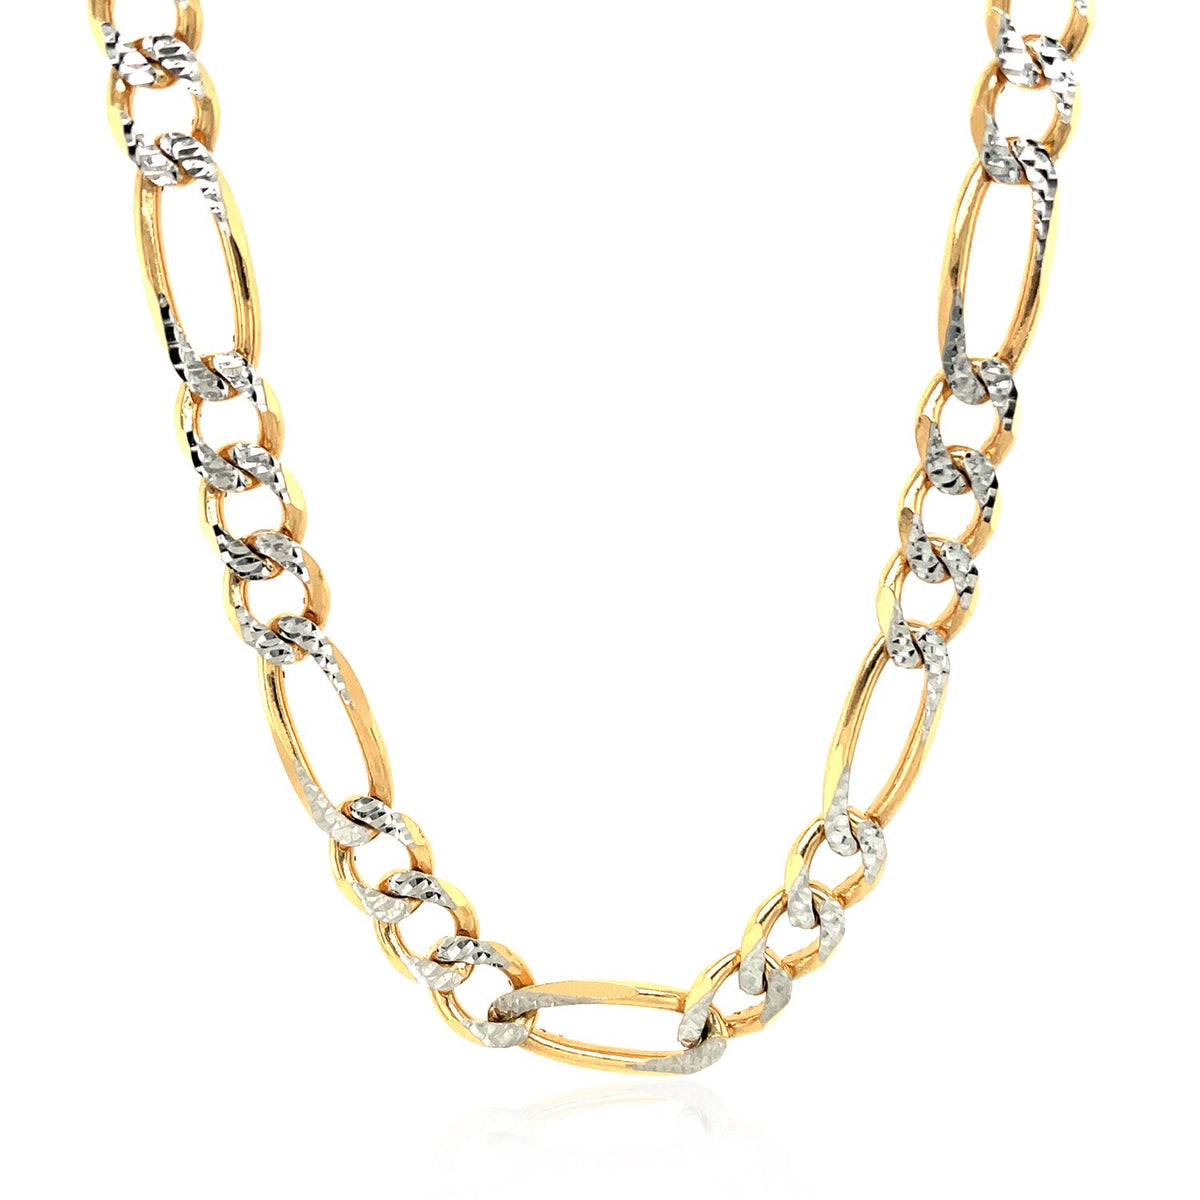 Solid Pave Figaro Chain - 14k Yellow Gold 7.00mm